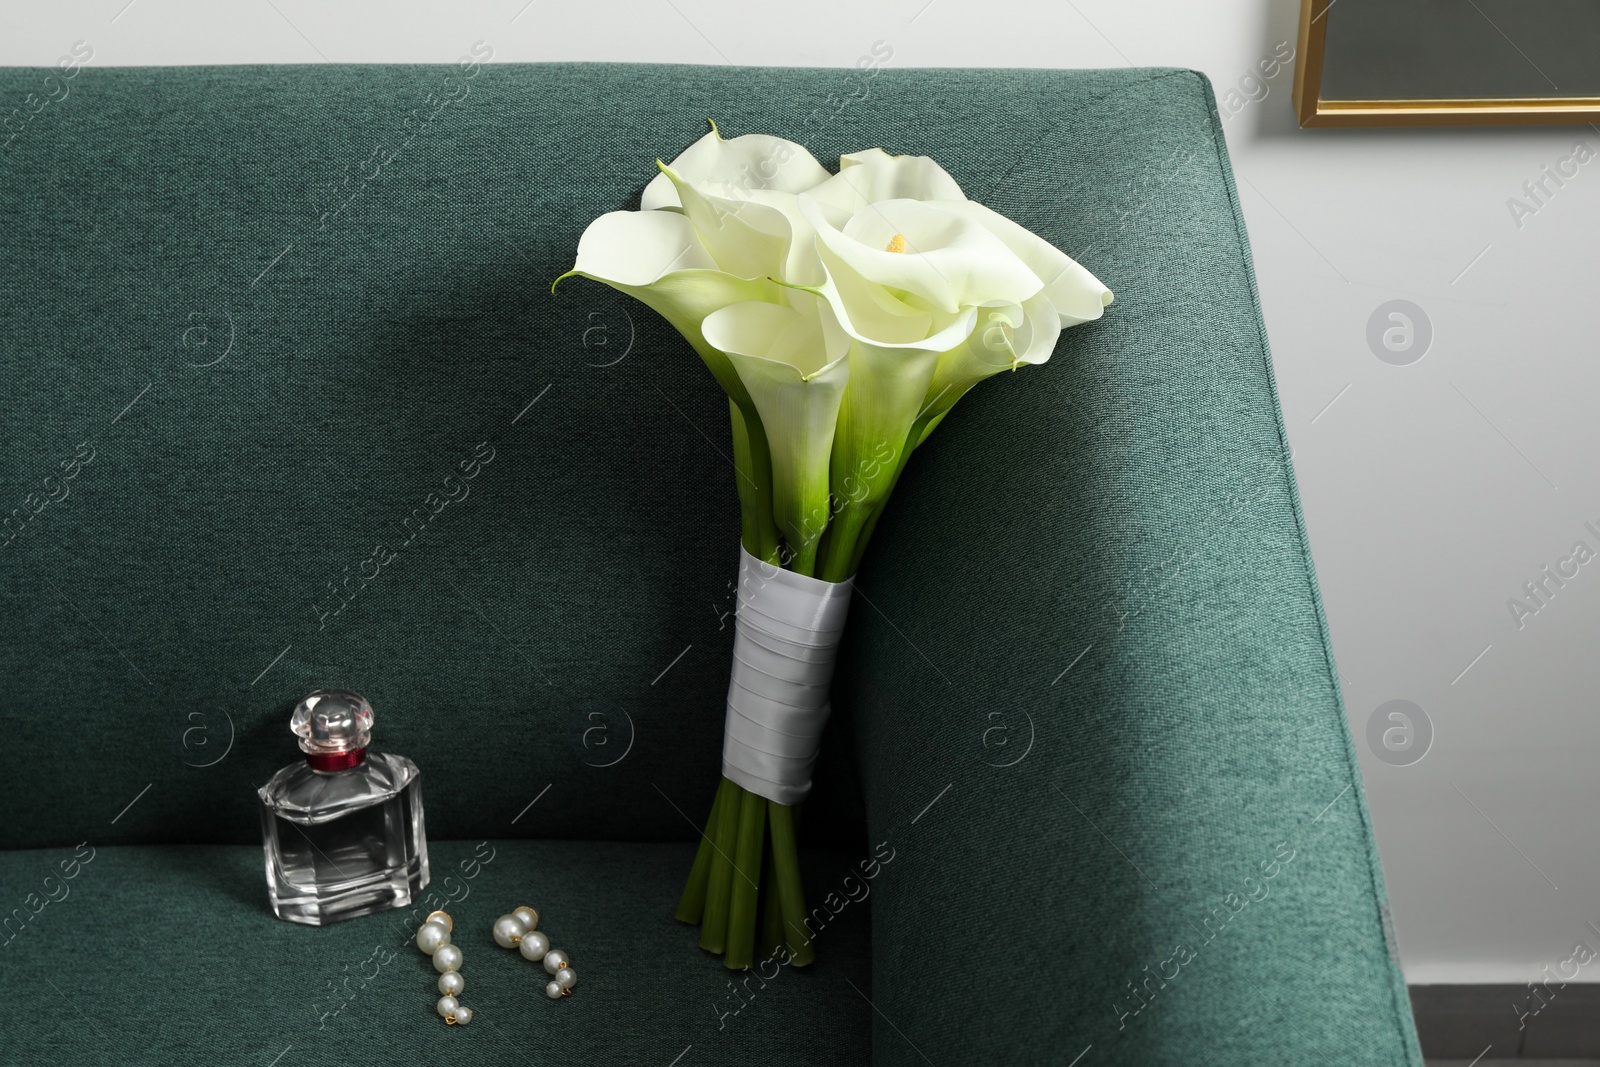 Photo of Beautiful calla lily flowers tied with ribbon, bottle of perfume and earrings on sofa indoors